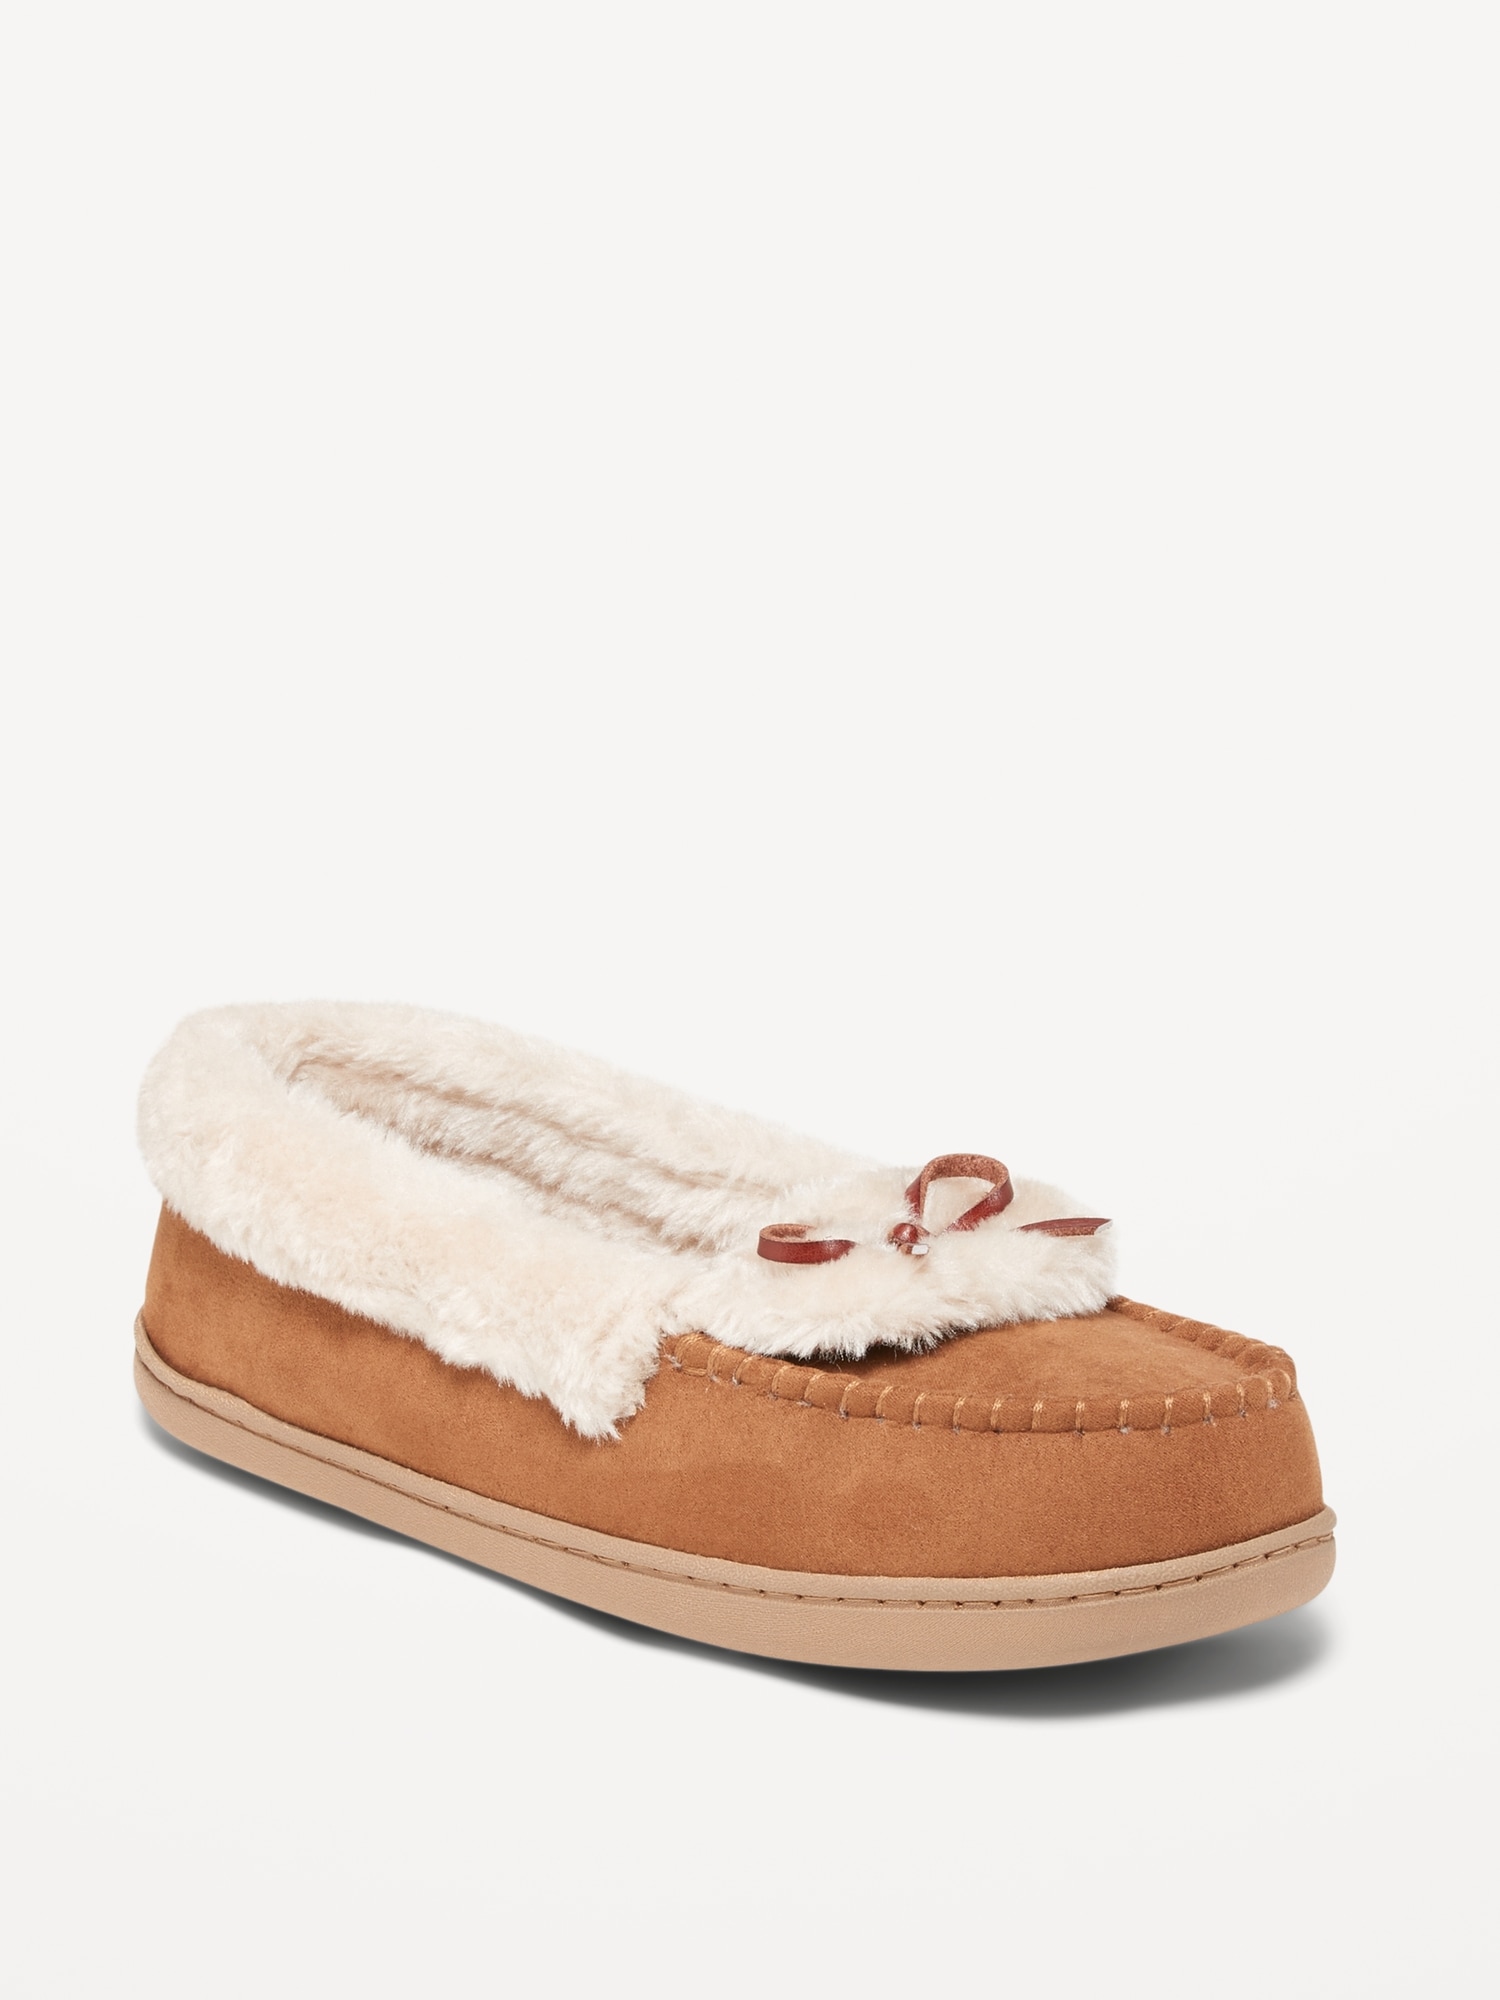 Faux-Suede Sherpa-Lined Moccasin Slippers For Women | Old Navy